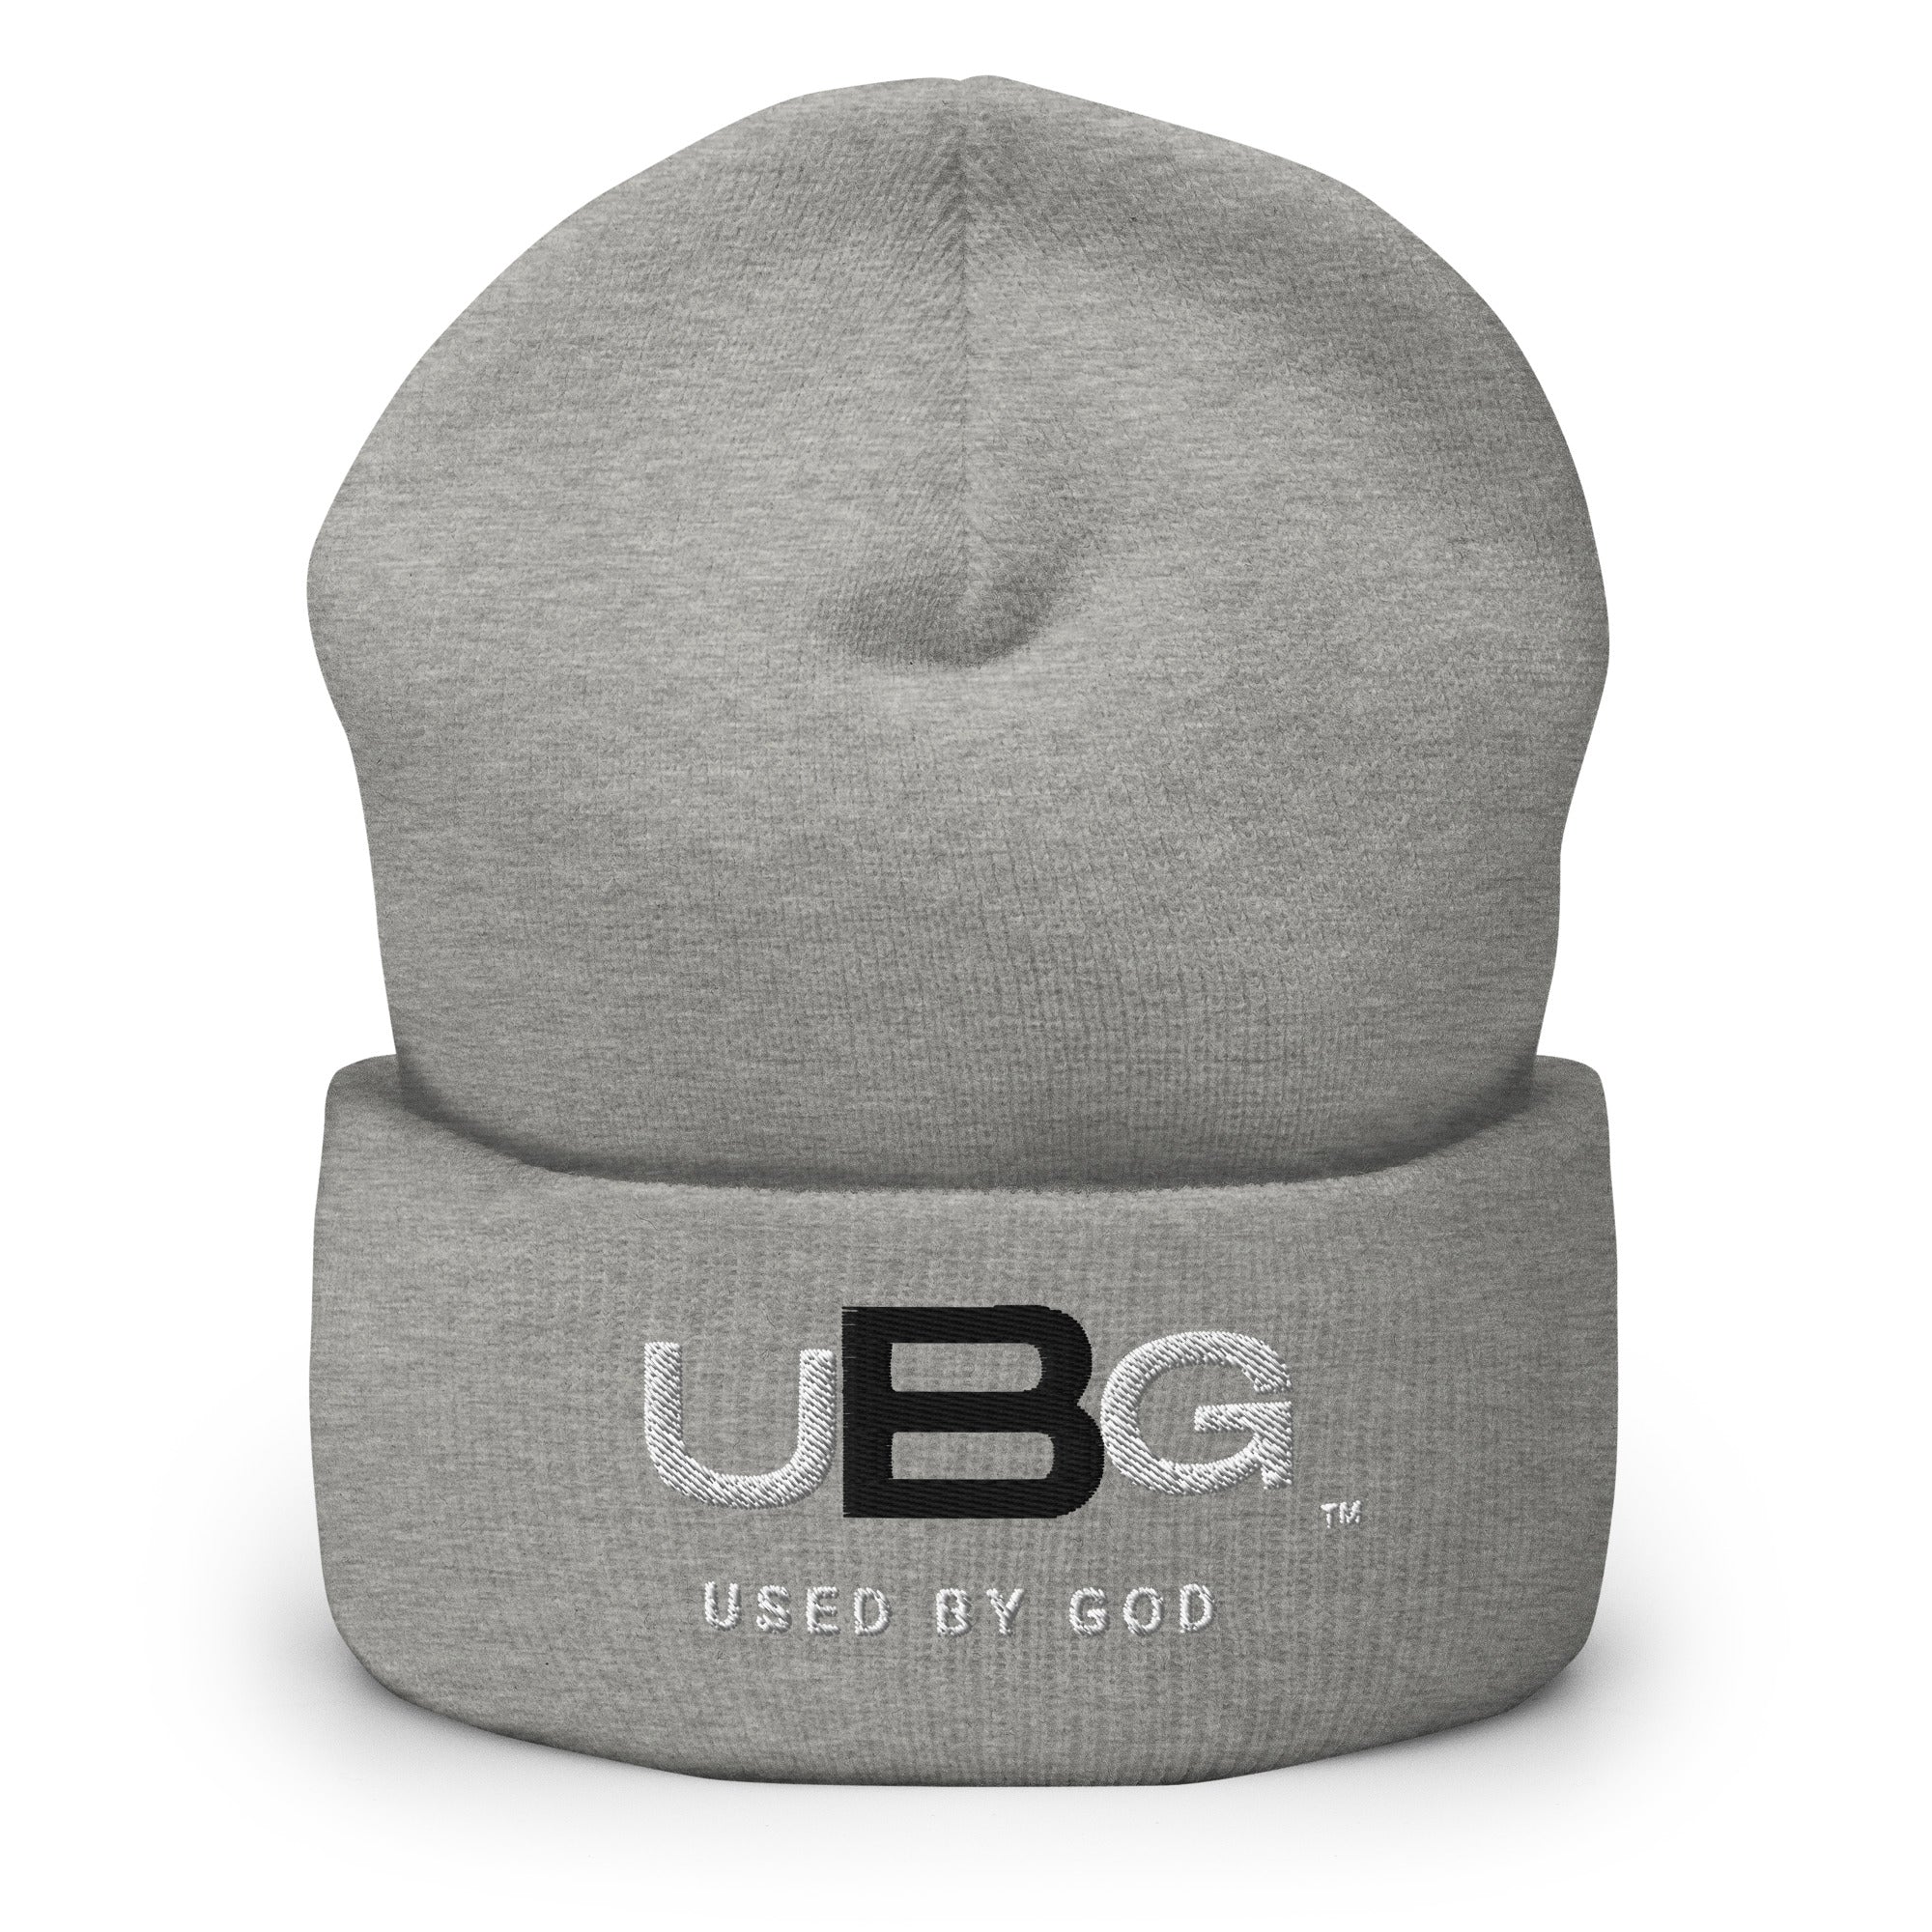 Used By God Beanie, Used By God, Used By God Clothing, Christian Apparel, Christian Hats, Christian T-Shirts, Christian Clothing, God Shirts, Christian Sweatshirts, God Clothing, Jesus Hoodie, Jesus Clothes, God Is Dope, Art Of Homage, Red Letter Clothing, Elevated Faith, Active Faith Sports, Beacon Threads, God The Father Apparel